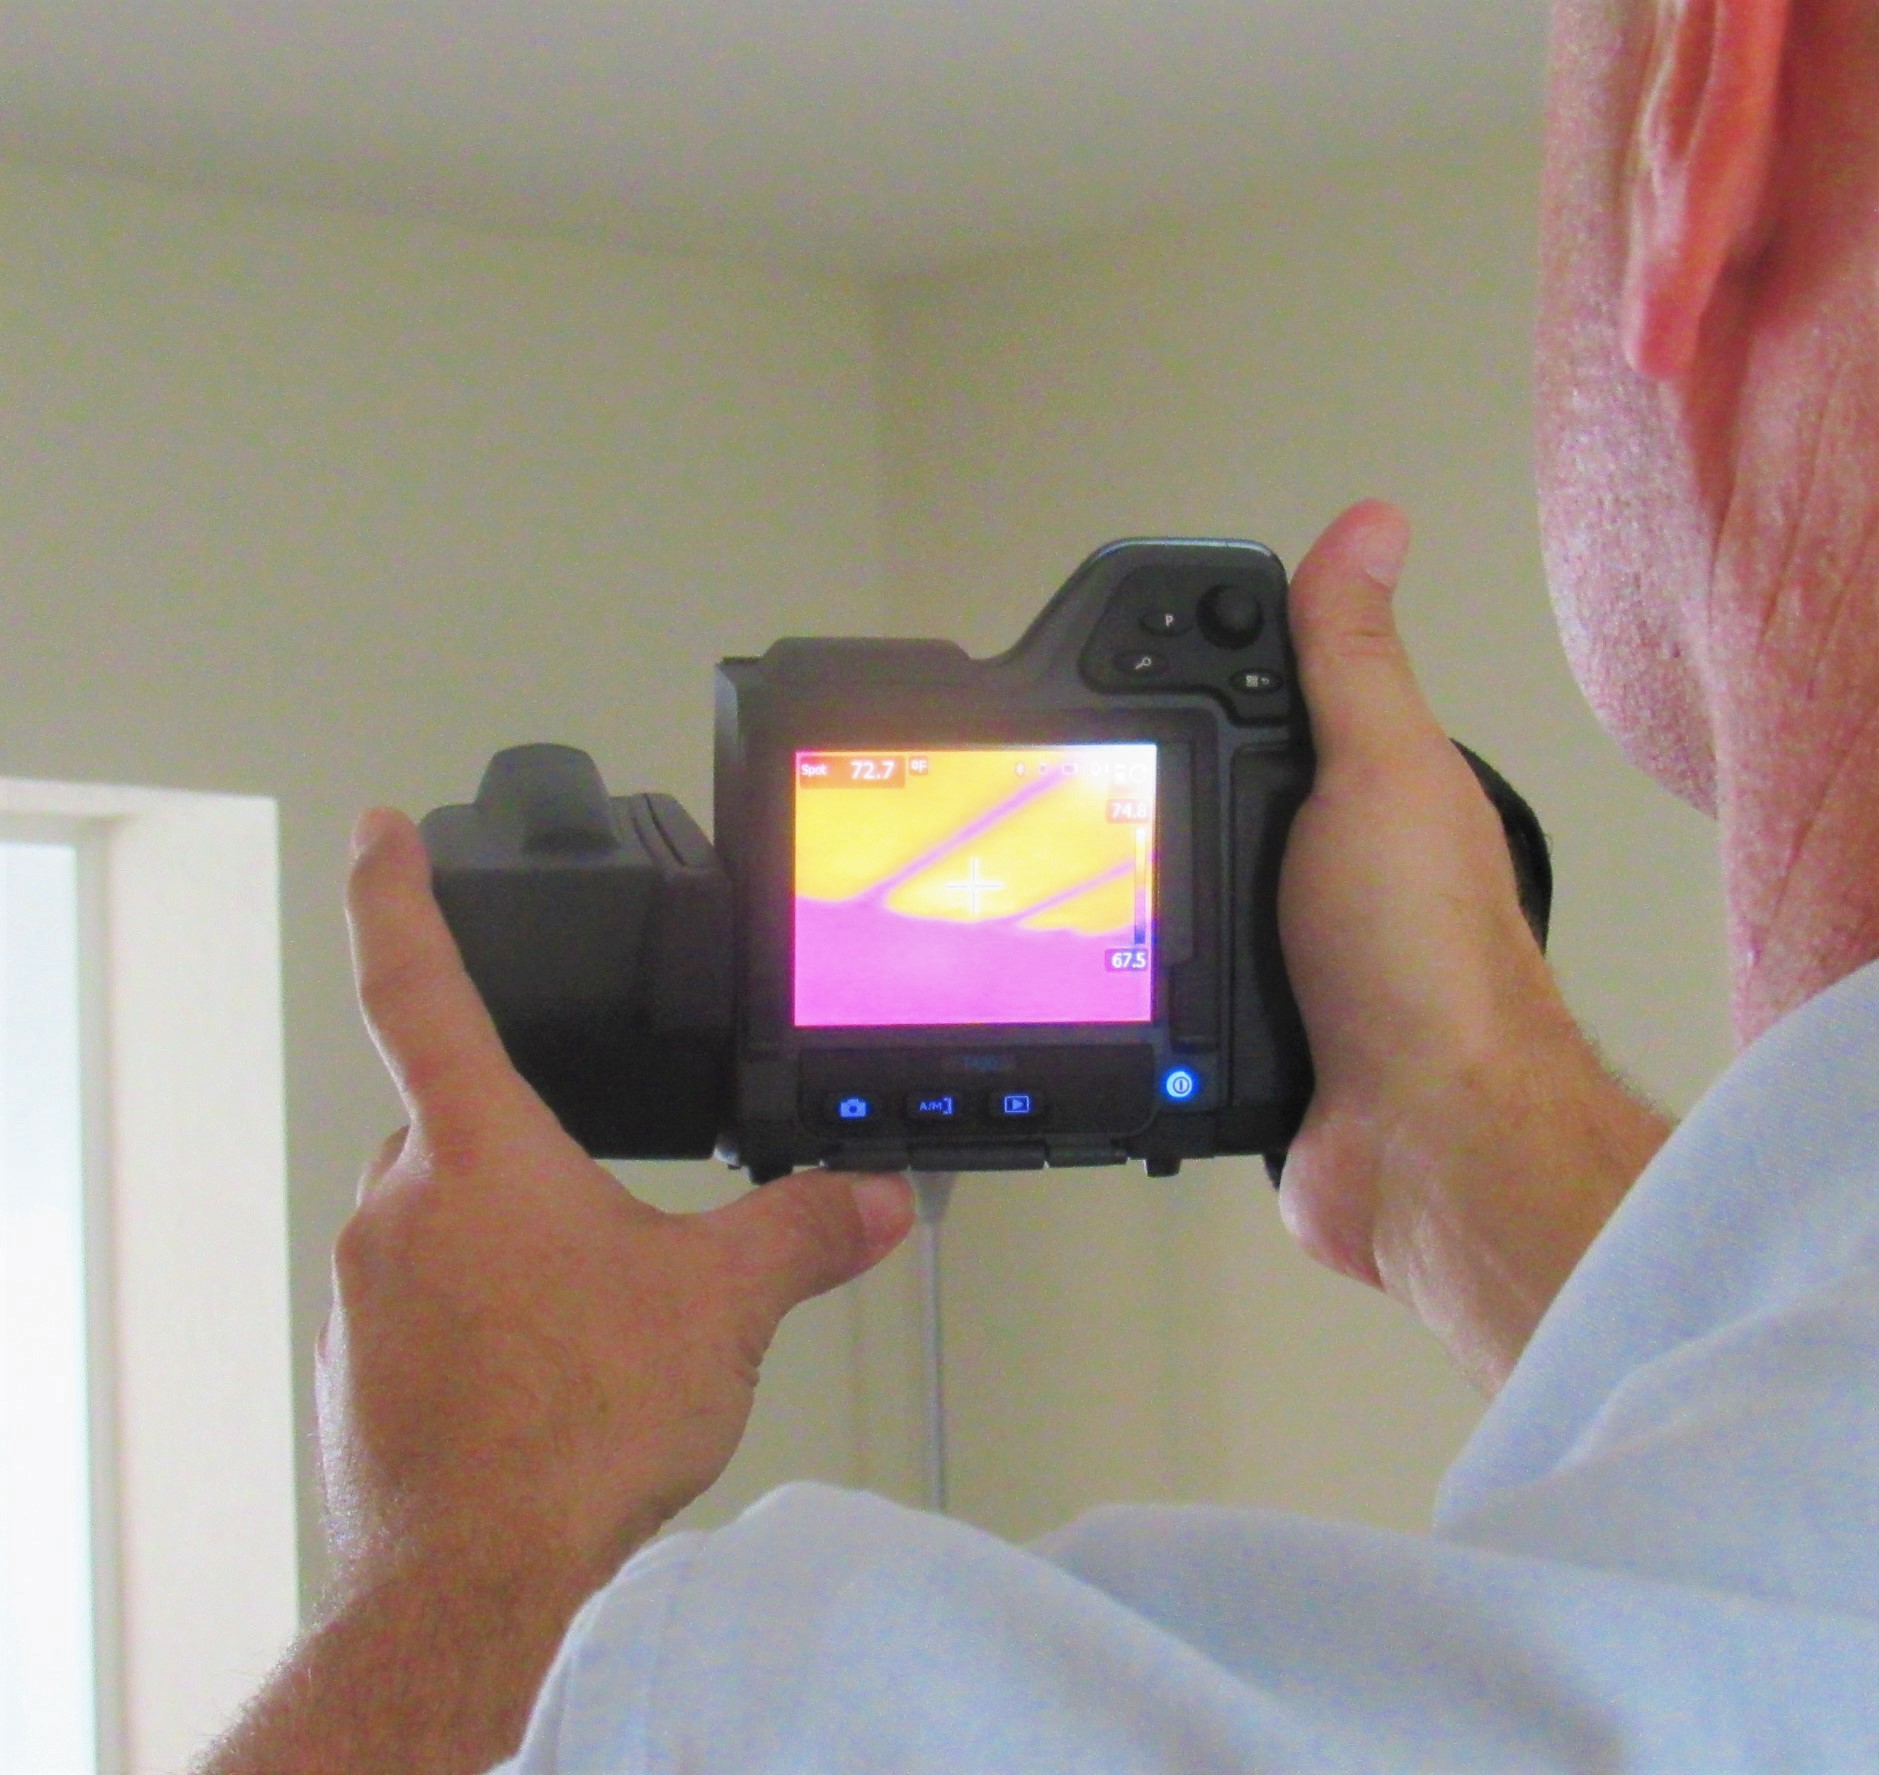 Infrared Inspections Thermal Scan - Missing Insulation